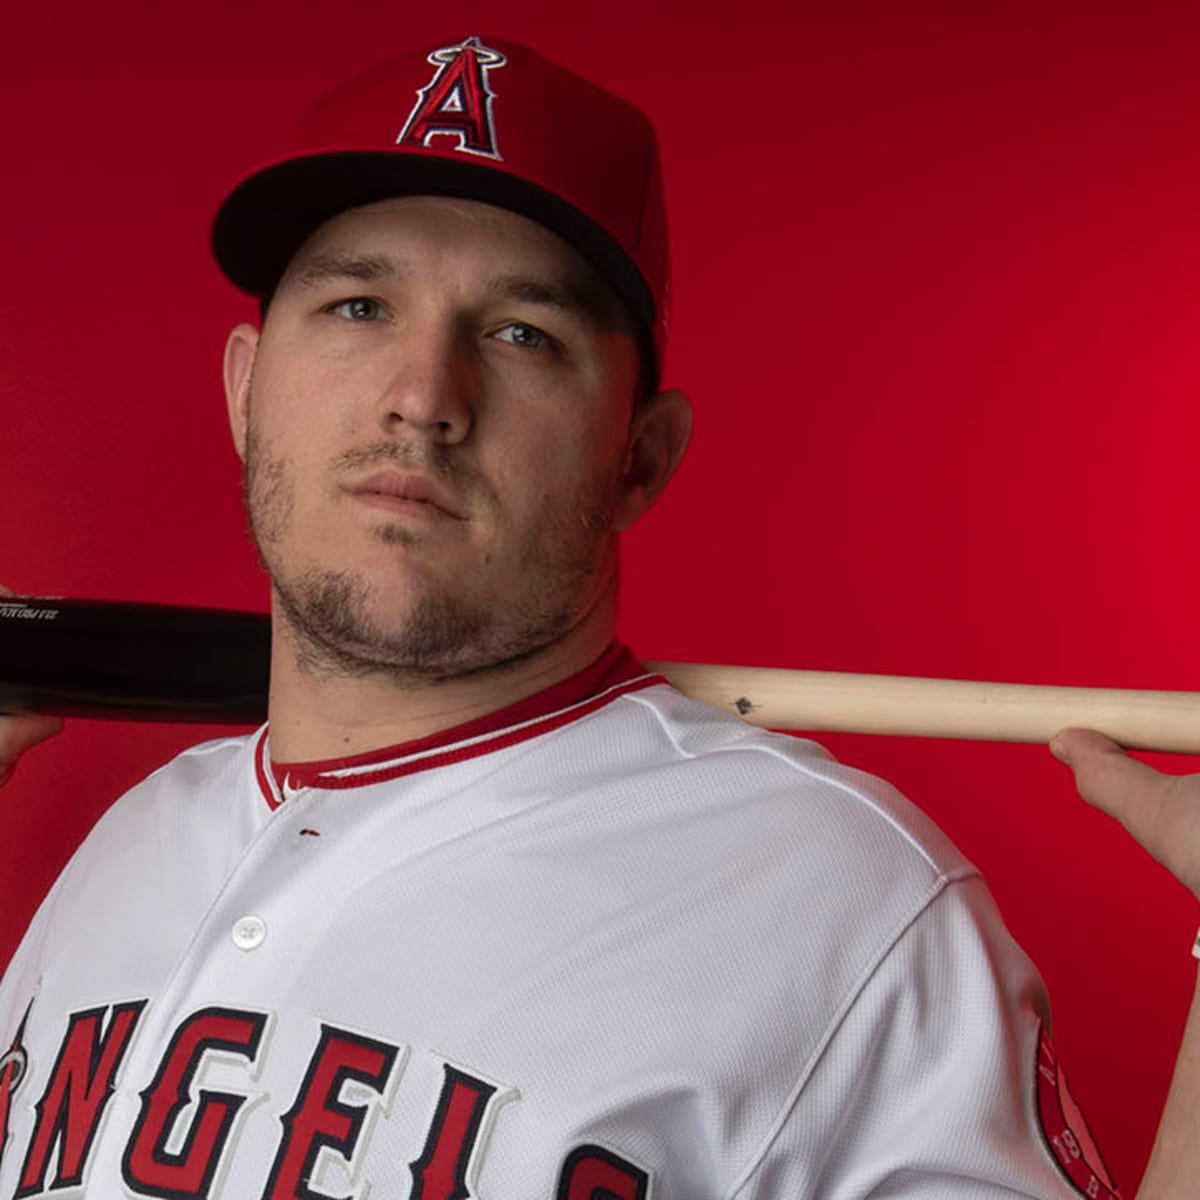 Rookie Phenom Mike Trout Makes Cover Of Sports Illustrated - CBS